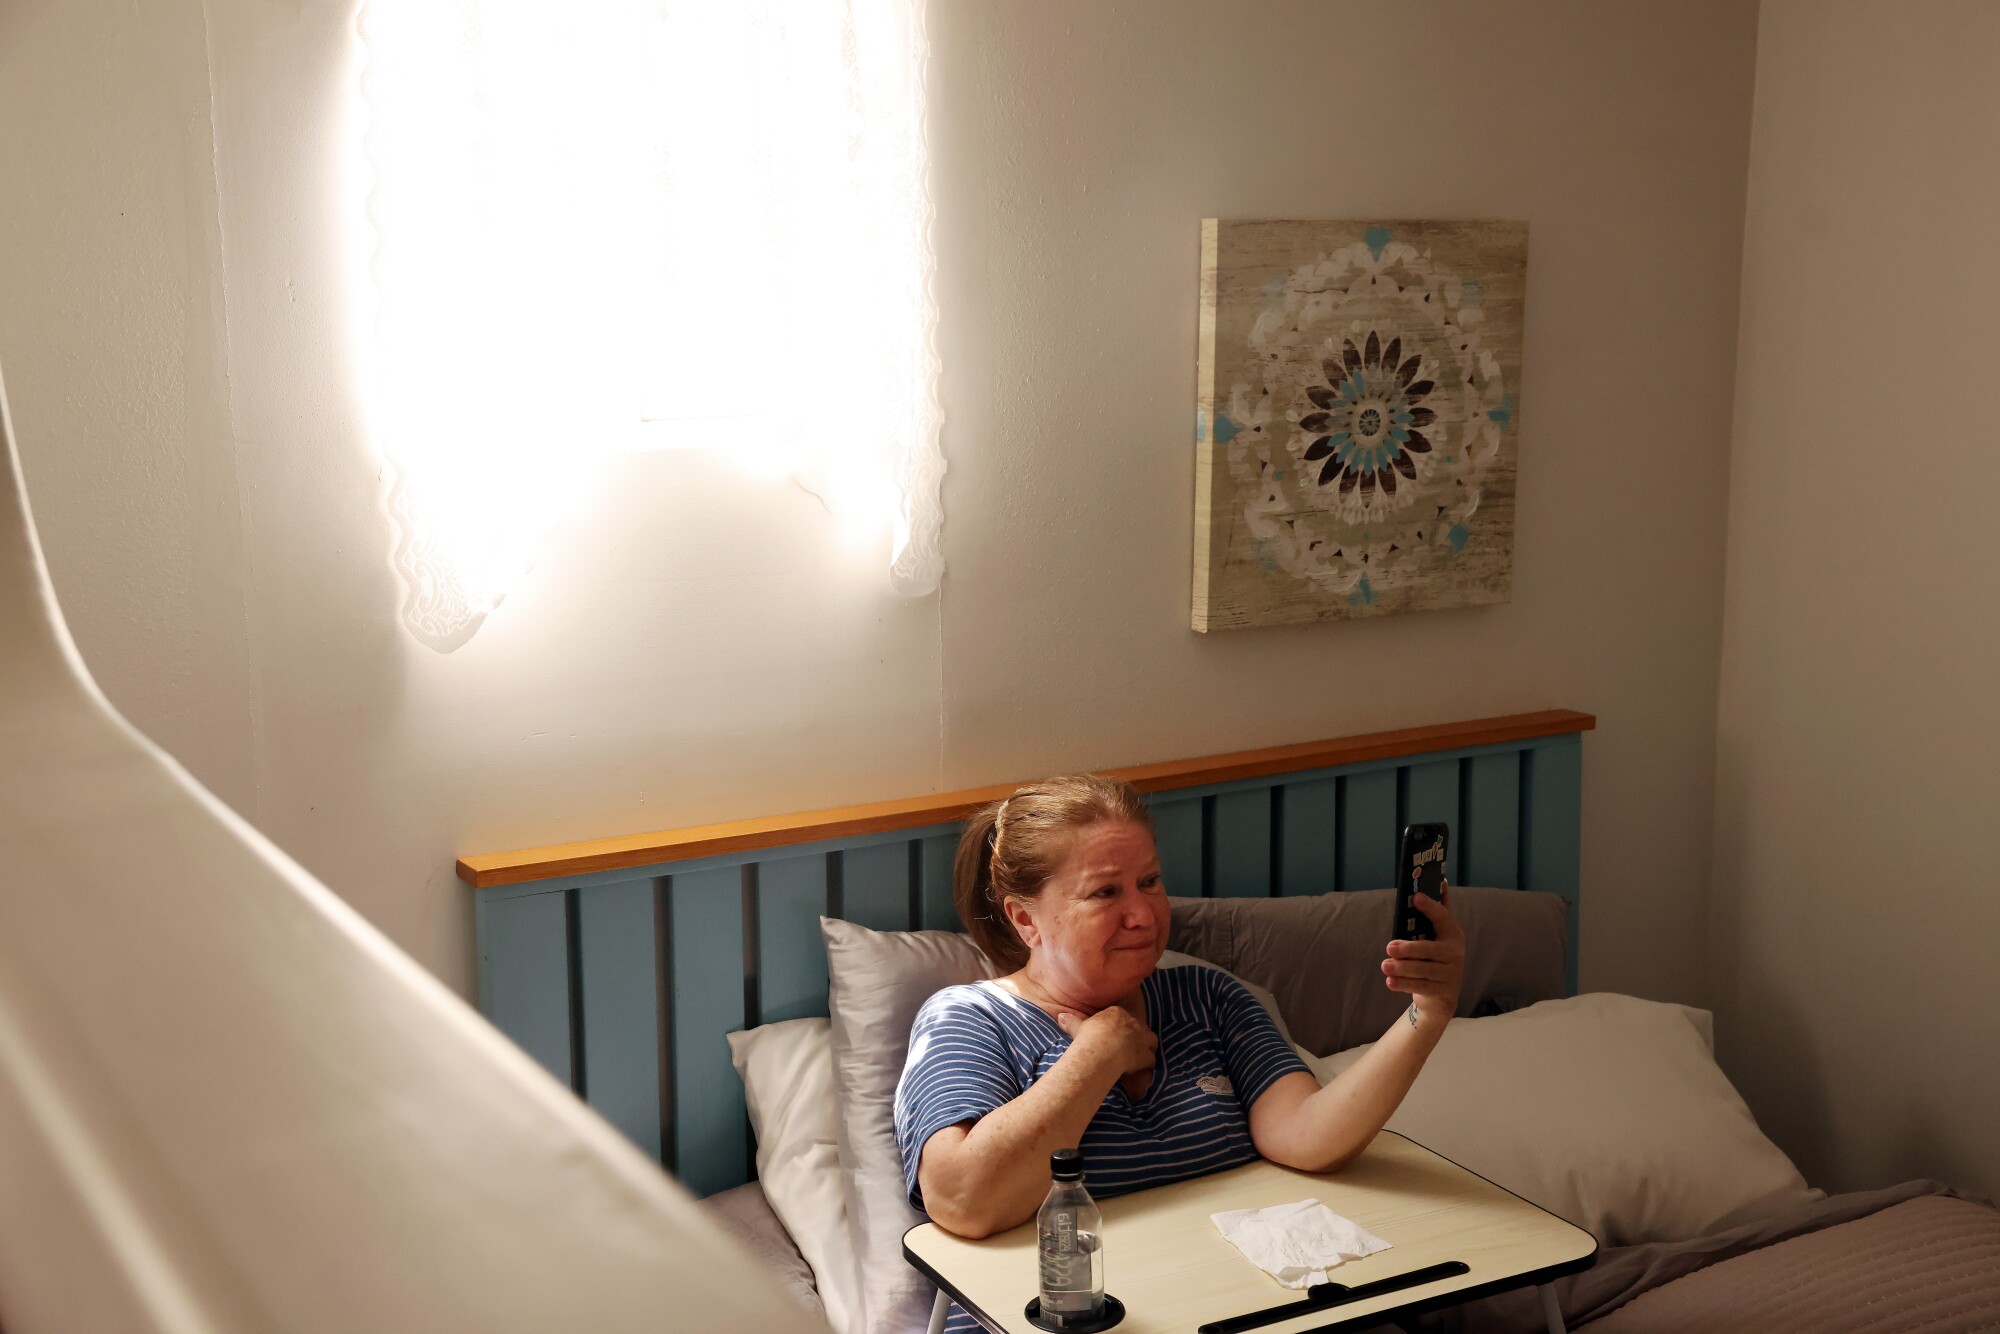 A woman on a bed FaceTimes on a phone